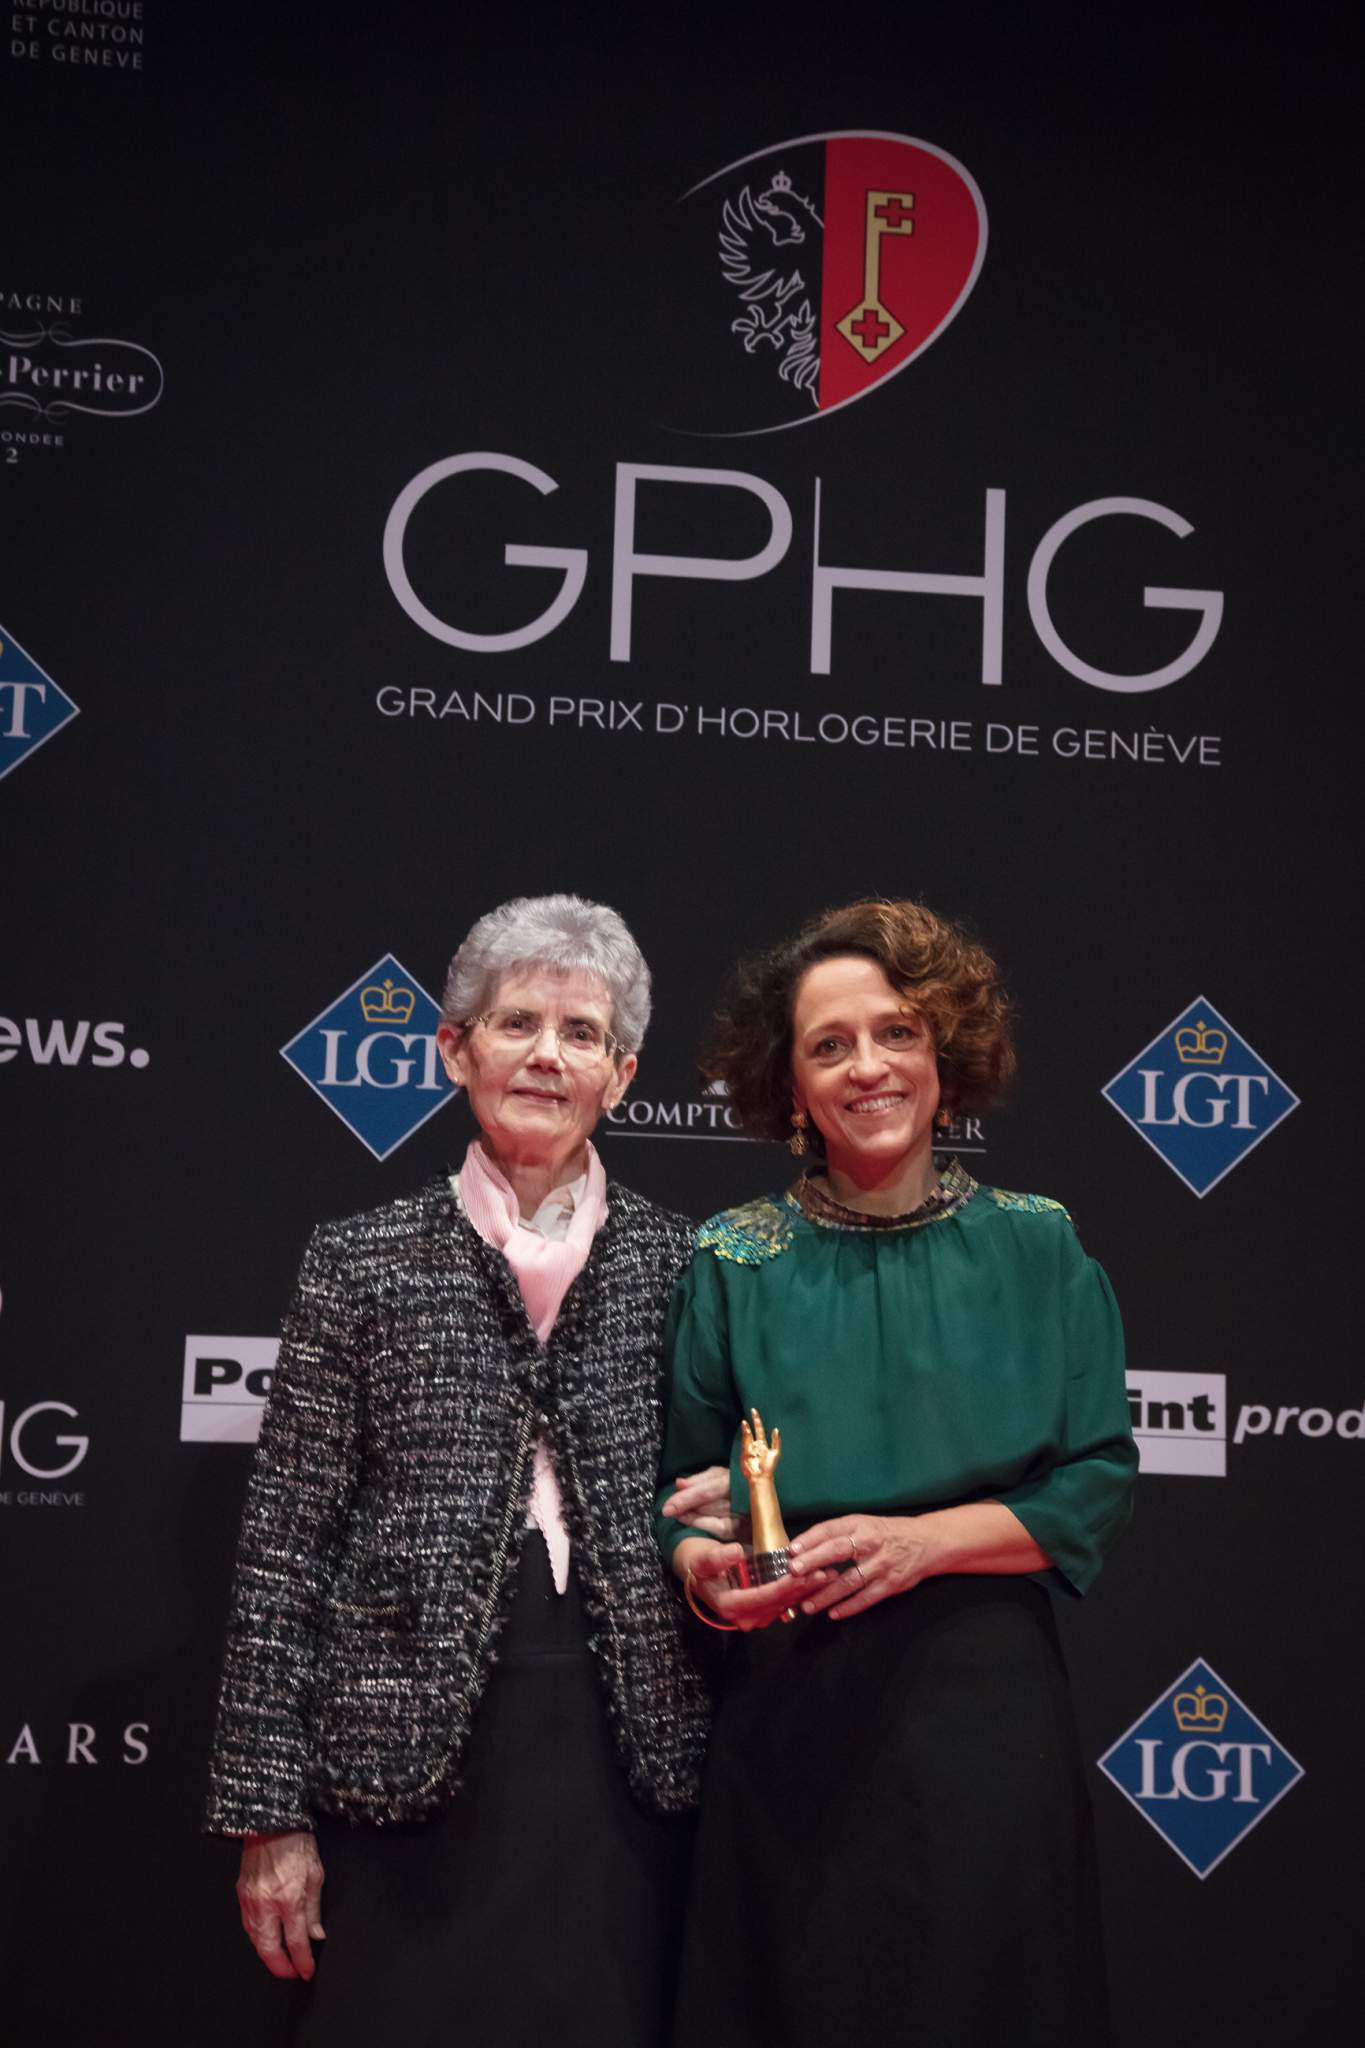 Suzanne Rohr and Anita Porchet (winners of Special Jury Prize 2017)